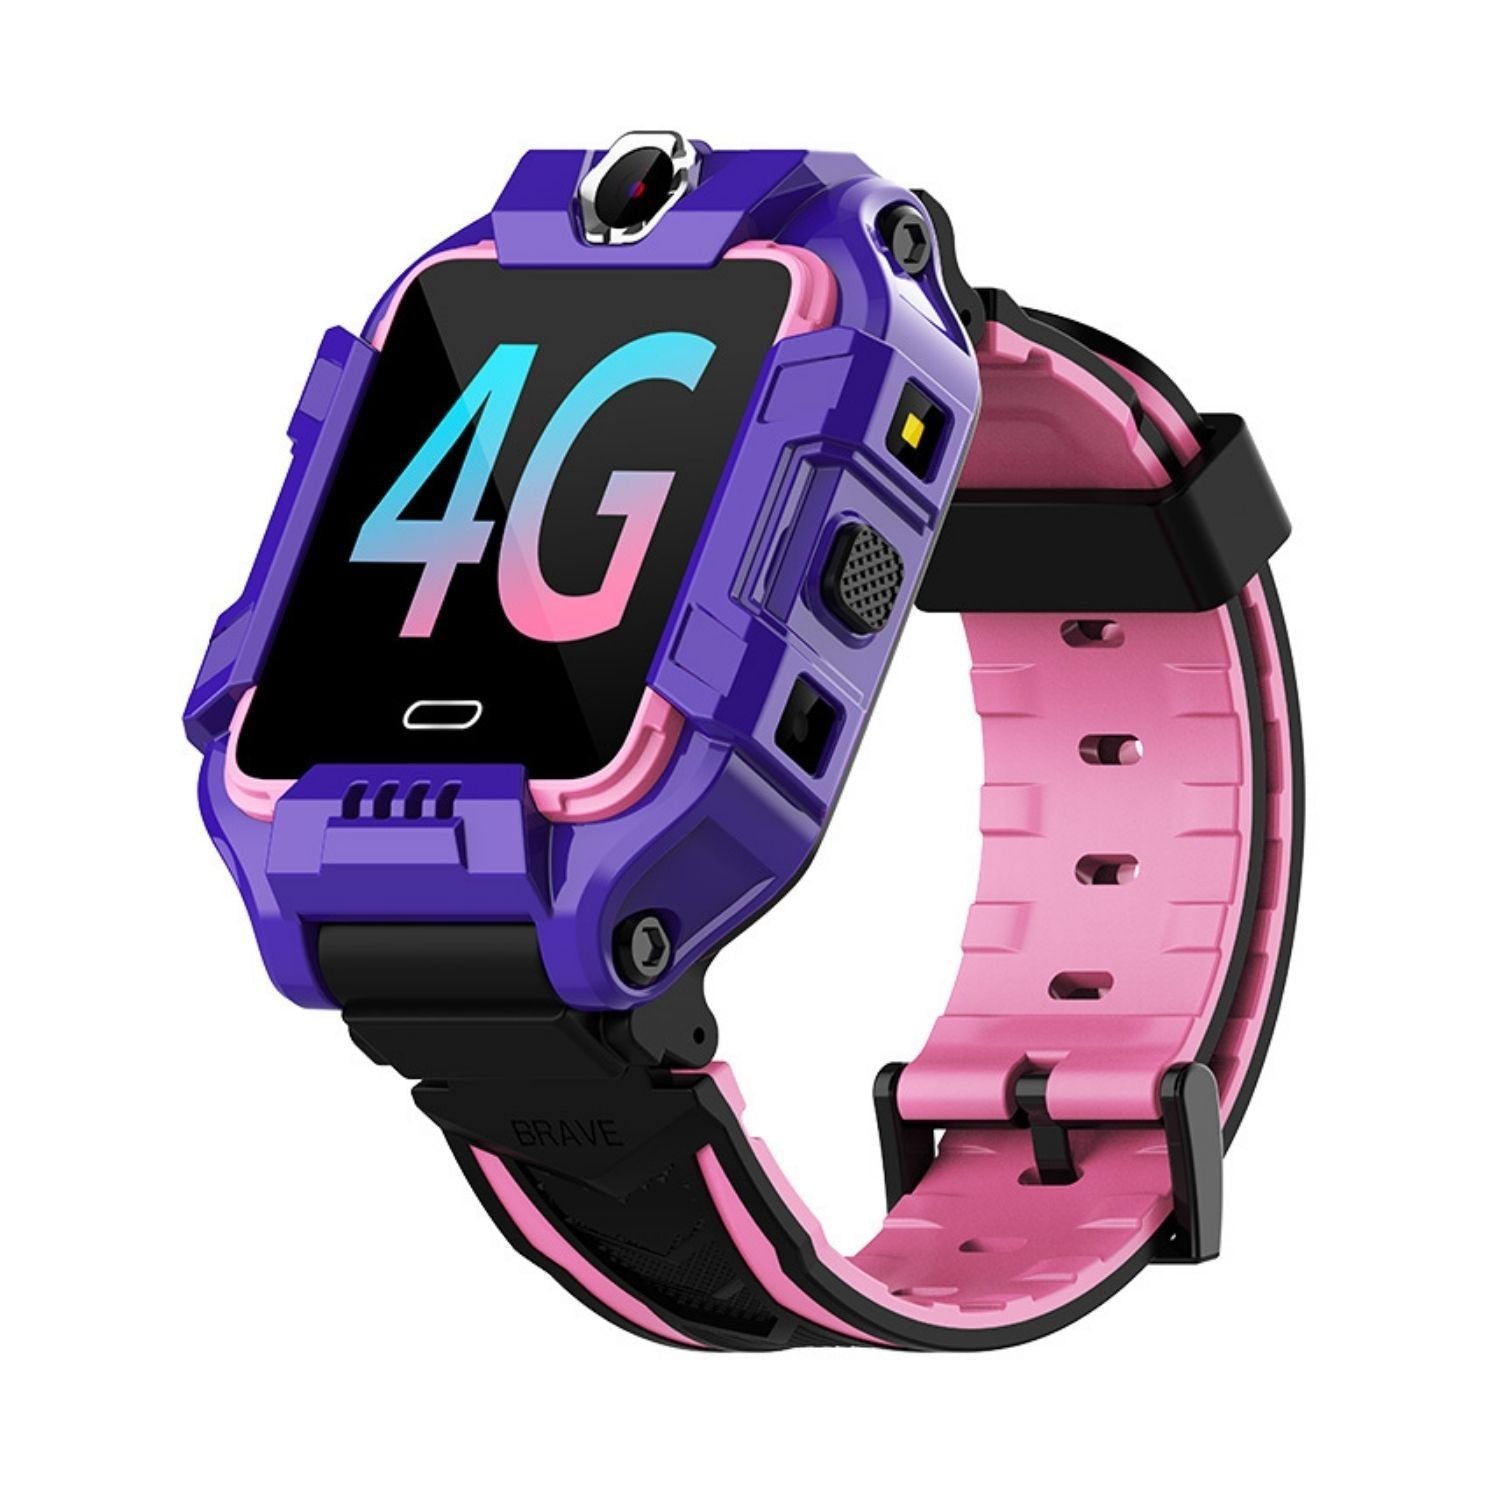 CACTUS - Kidocall - 4G Smartwatch, Phone & GPS Tracking for Kids - Pink - CAC-129-M12